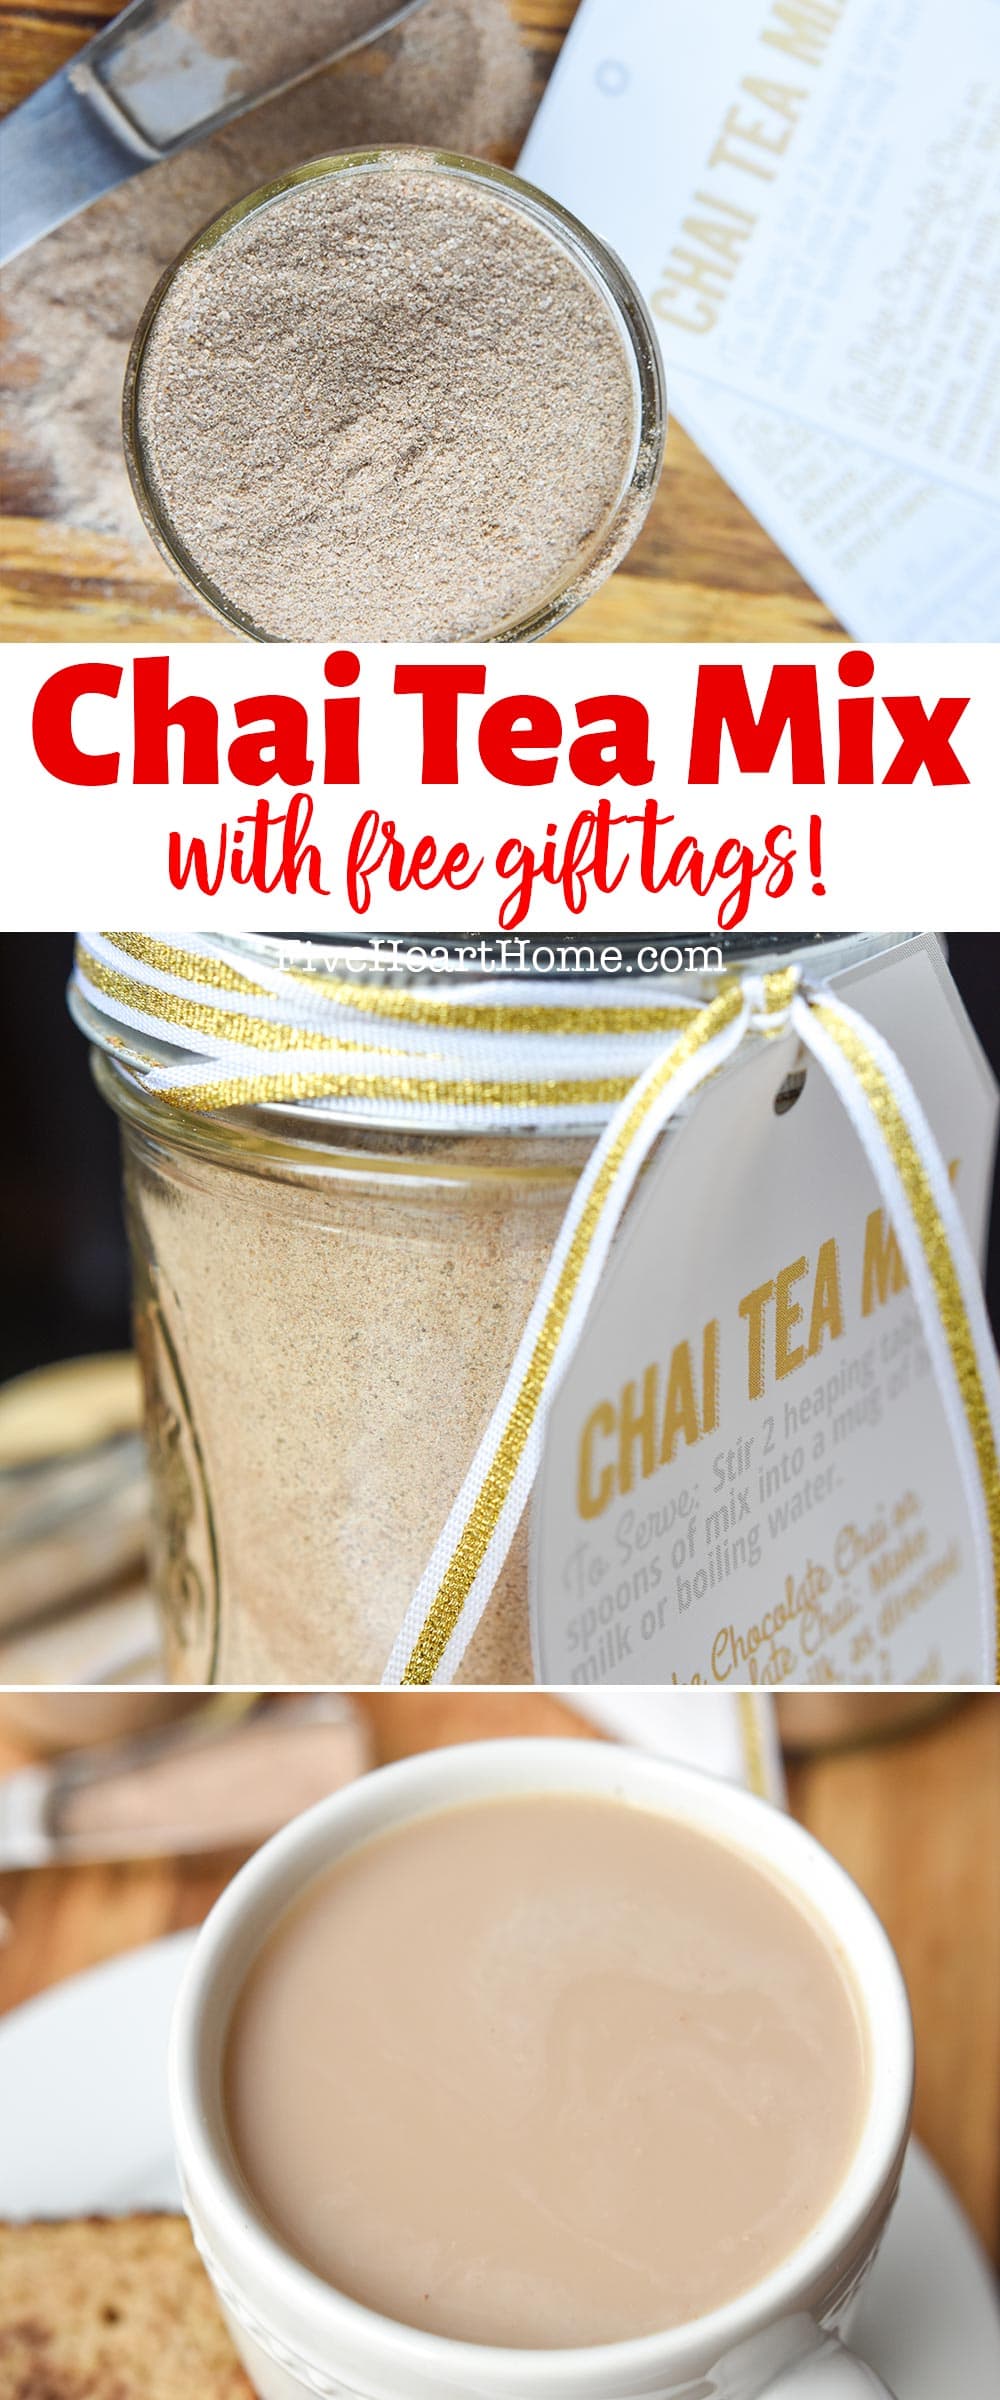 Chai Tea Mix ~ a delicious pantry staple or a unique homemade food gift for those who love Chai Tea! Use the mix to whip up everything from a chai tea latte to a vanilla chai tea milkshake, or put it in a jar with the free printable tag of directions for gift giving! | FiveHeartHome.com via @fivehearthome